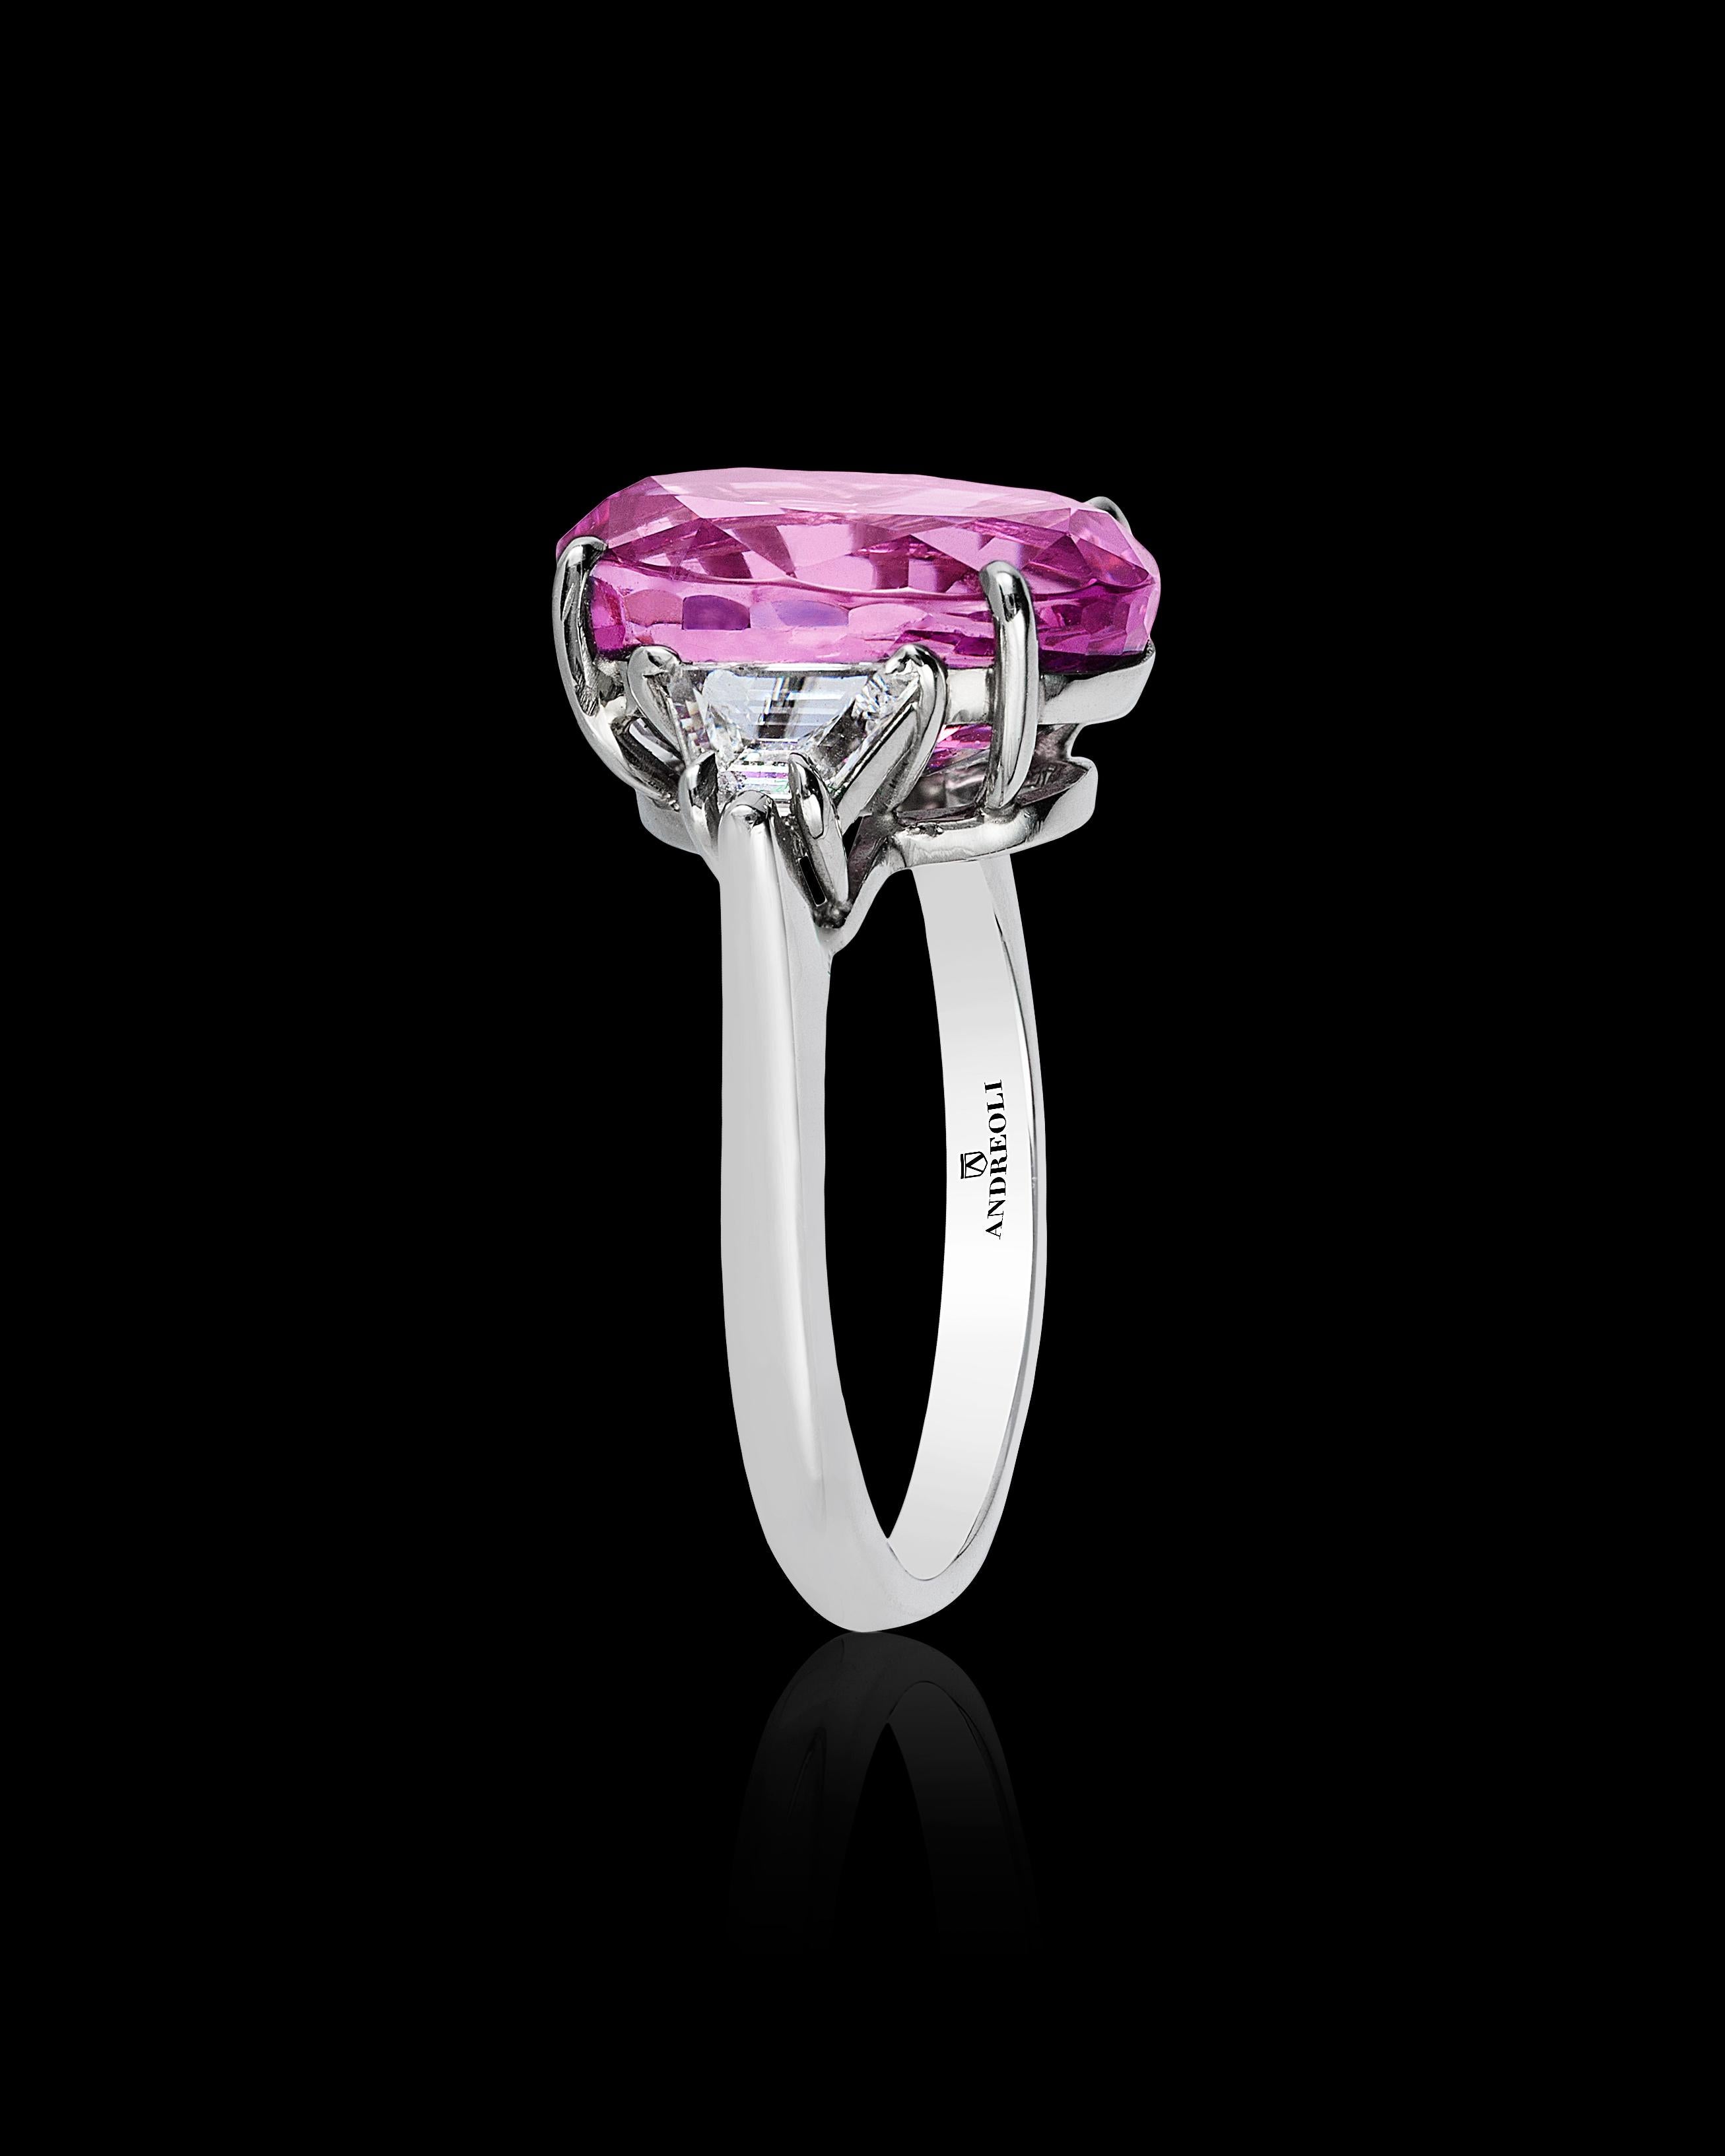 Oval Cut Andreoli GIA Certified 9.39 Carat Pink Sapphire Diamond Platinum Ring For Sale